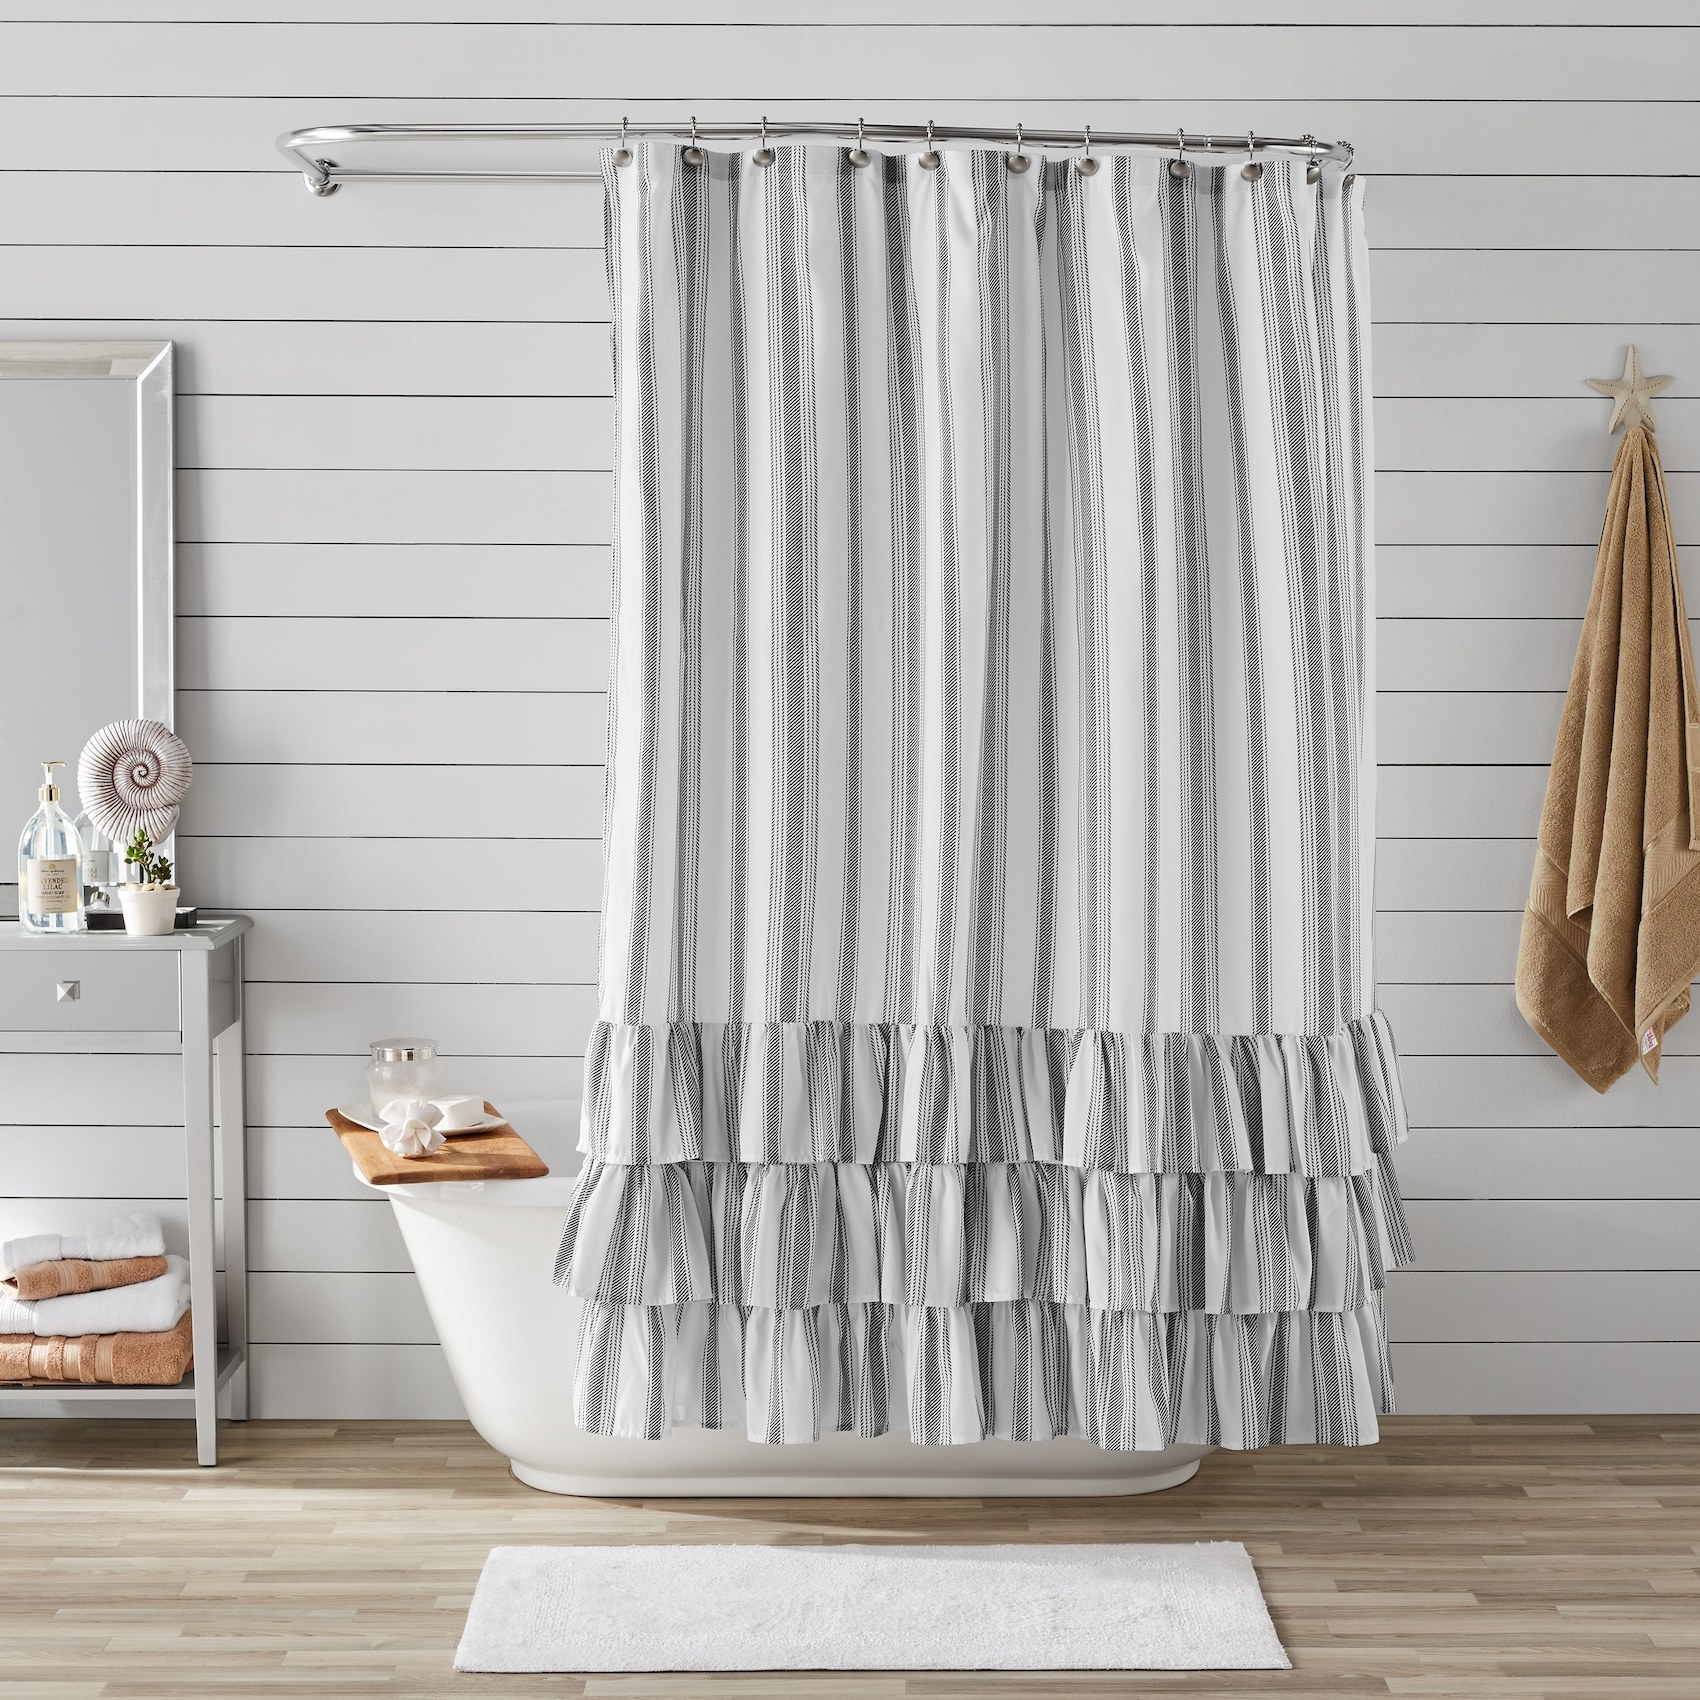 The shower curtain with vertical gray and white stripes and three tiers of ruffles on the bottom hanging in front of a shower in a bathroom